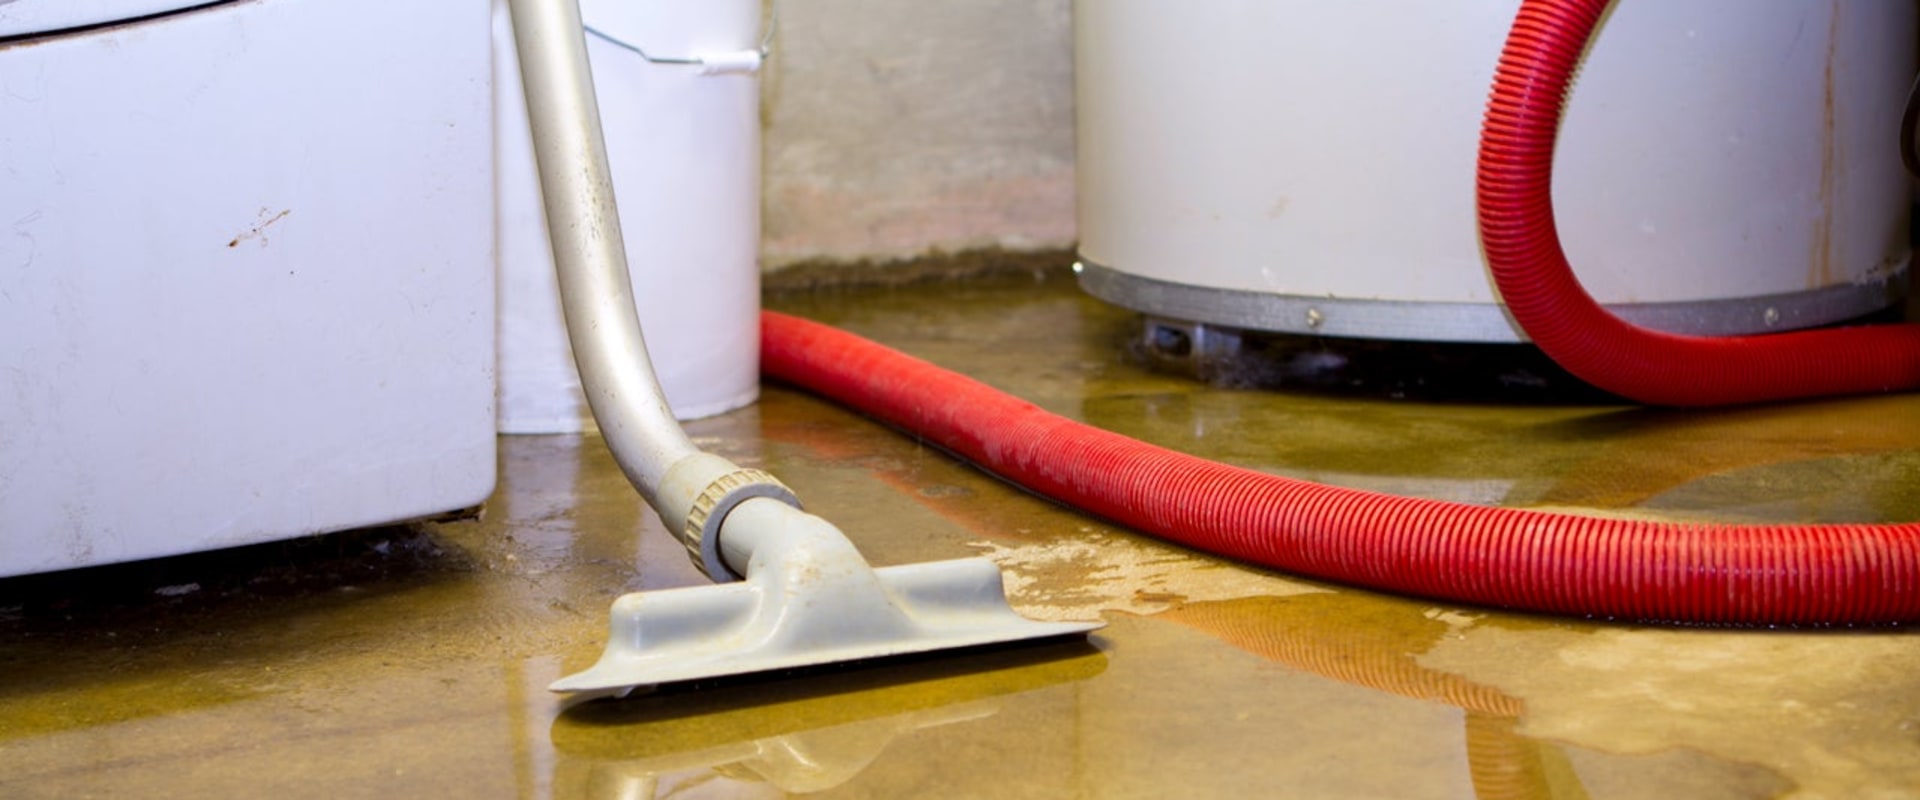 Understanding Insurance Coverage and Direct Billing for Water Damage